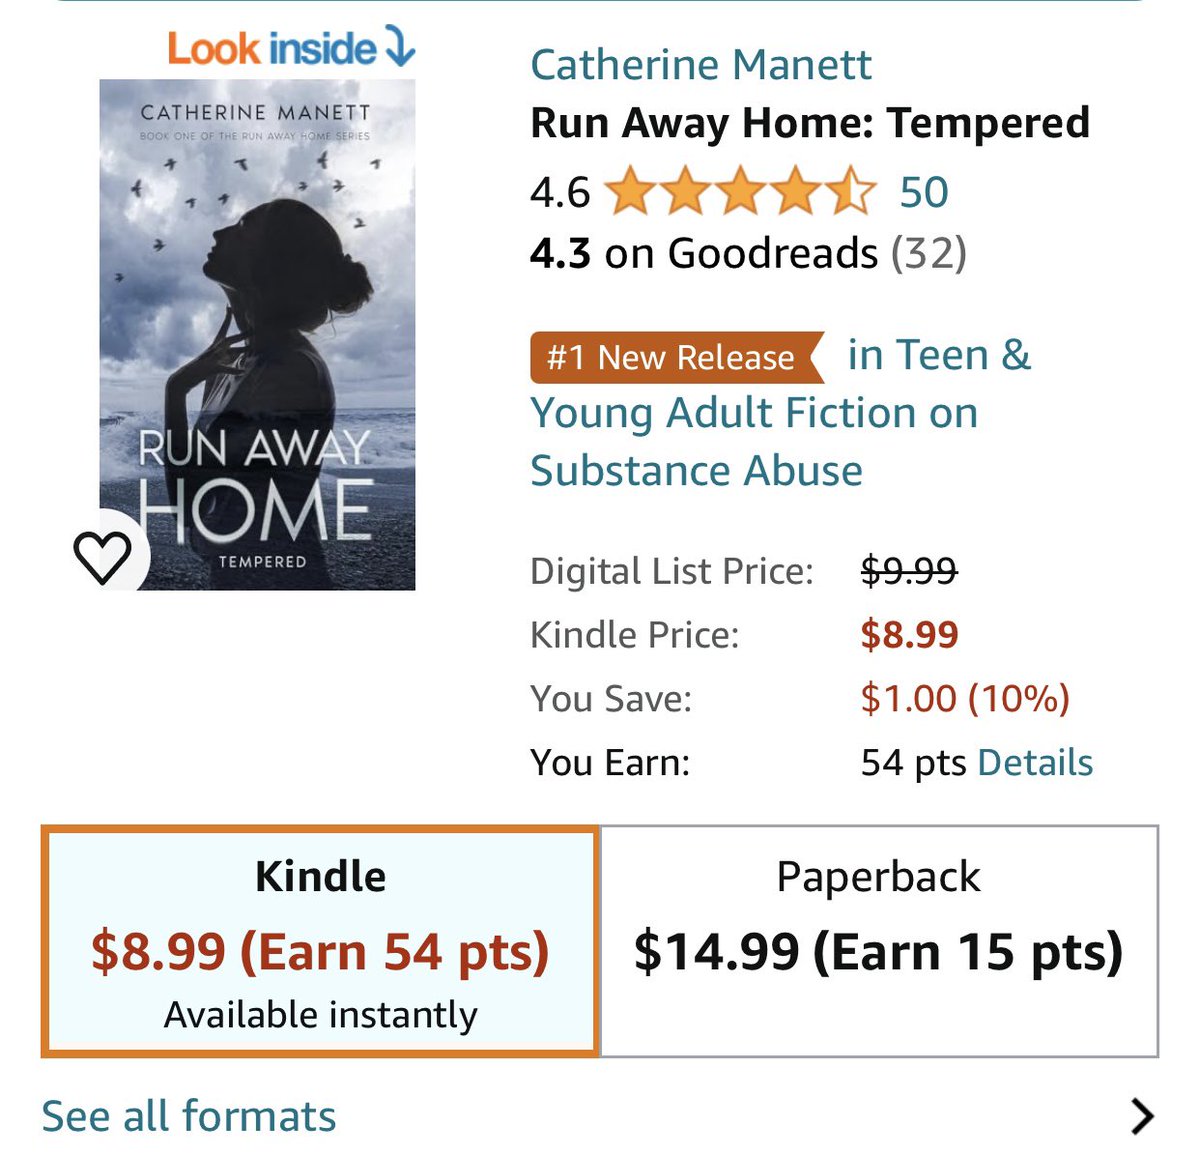 I DID IT! I’M A NUMBER ONE NEW RELEASE AUTHOR! #writingcommunity #writersoftwitter